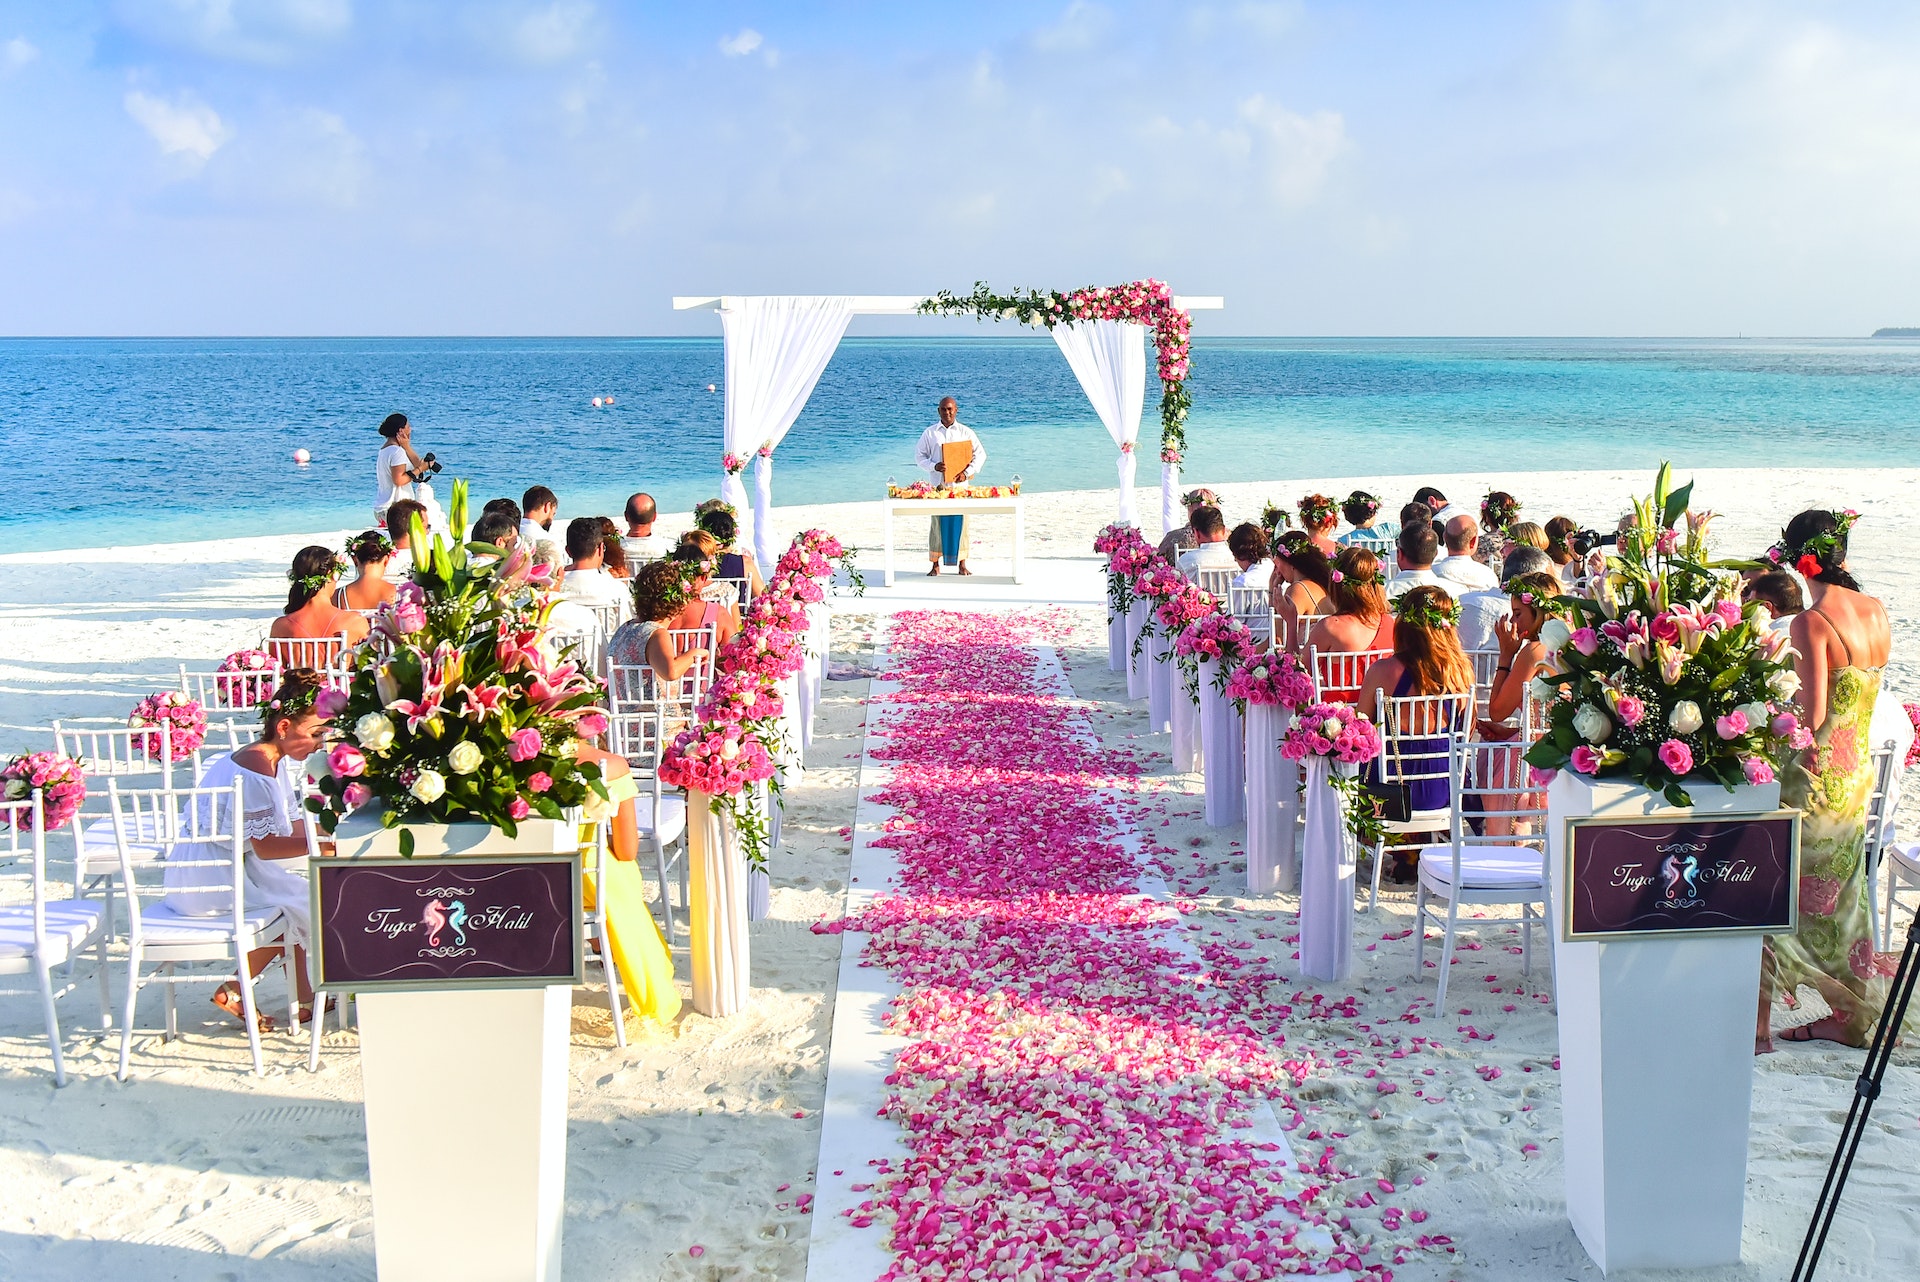 A beach wedding decorated with pink flowers.